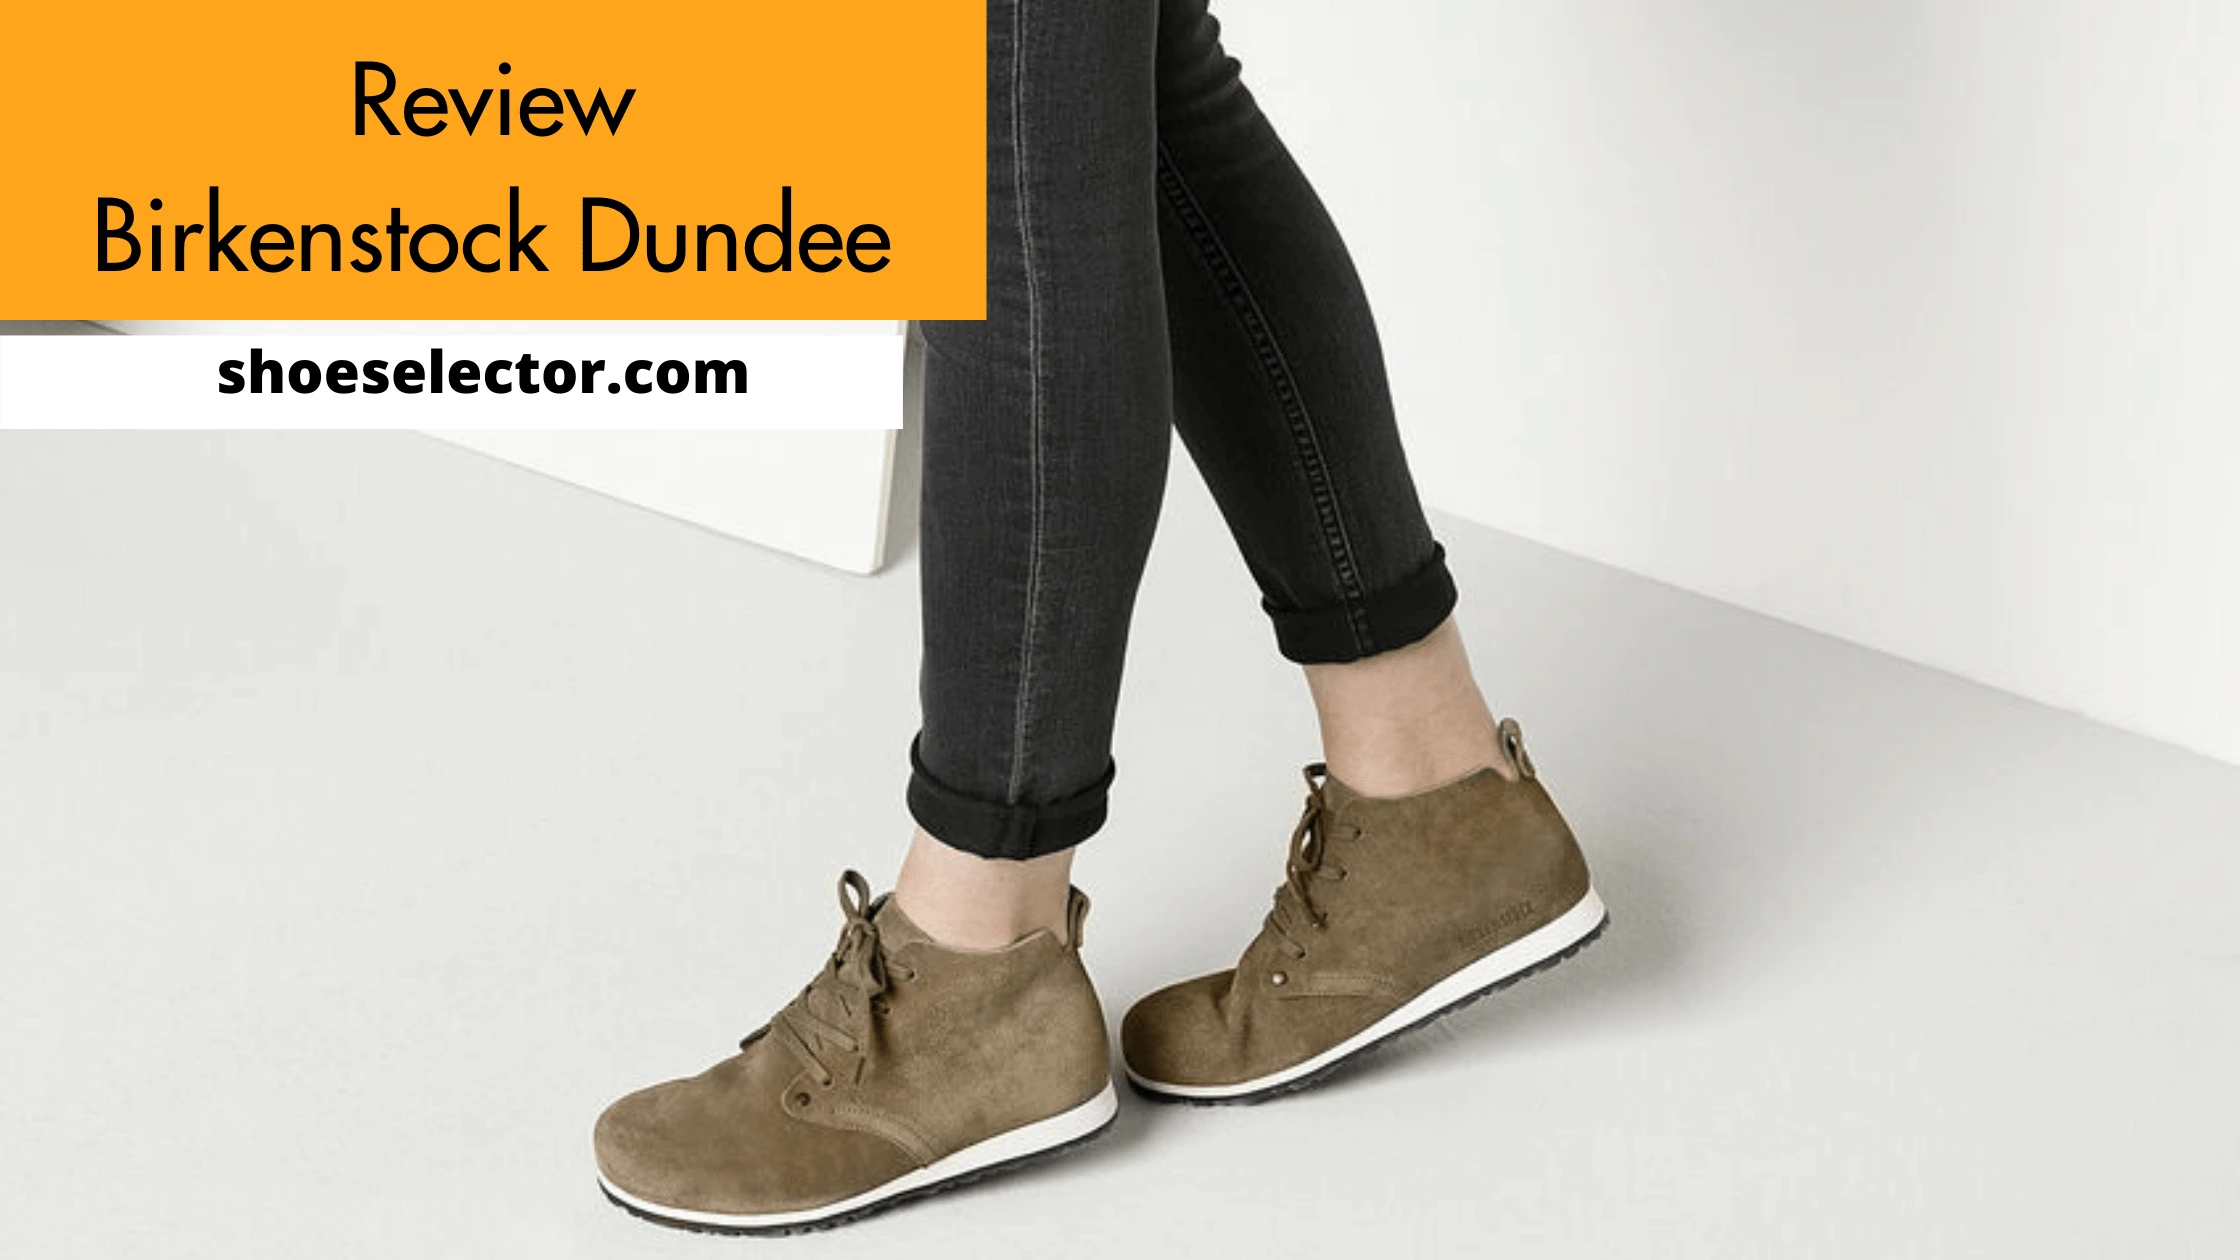 Birkenstock Dundee Review - Complete Guide